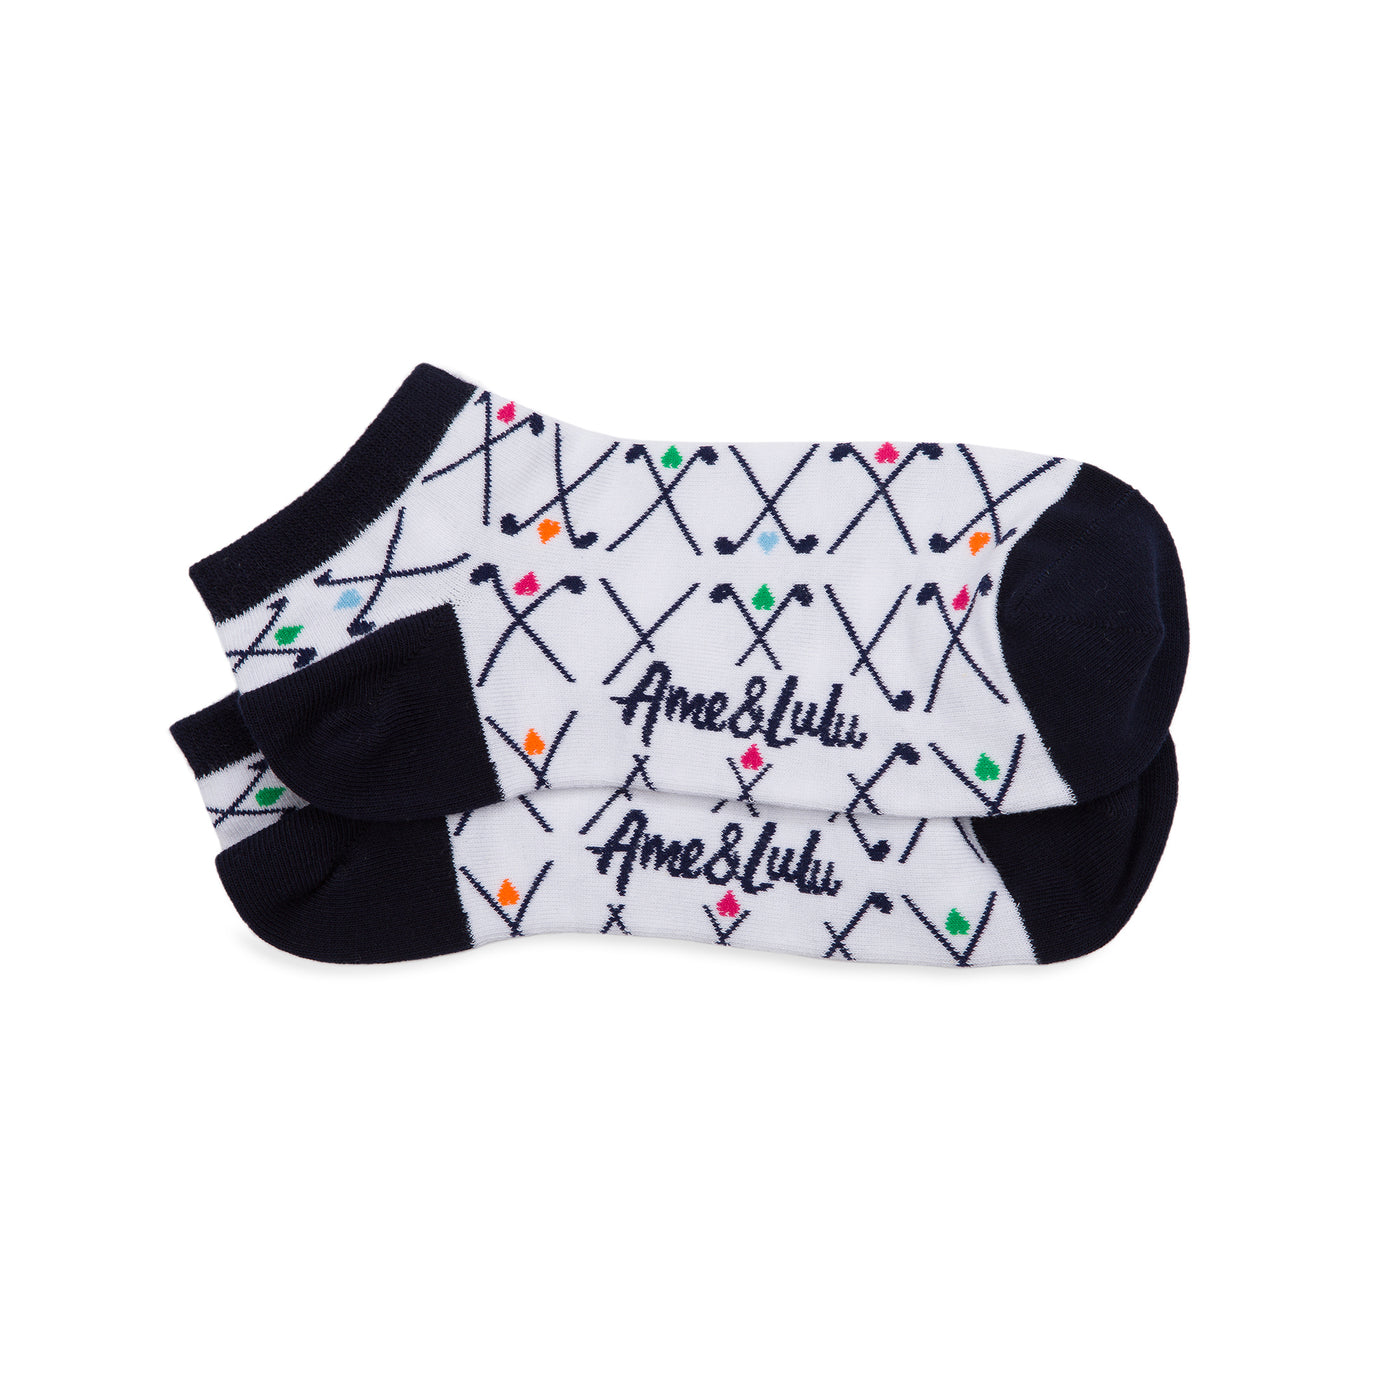 pair of white socks with pattern of navy crossed golf clubs and rainbow hearts